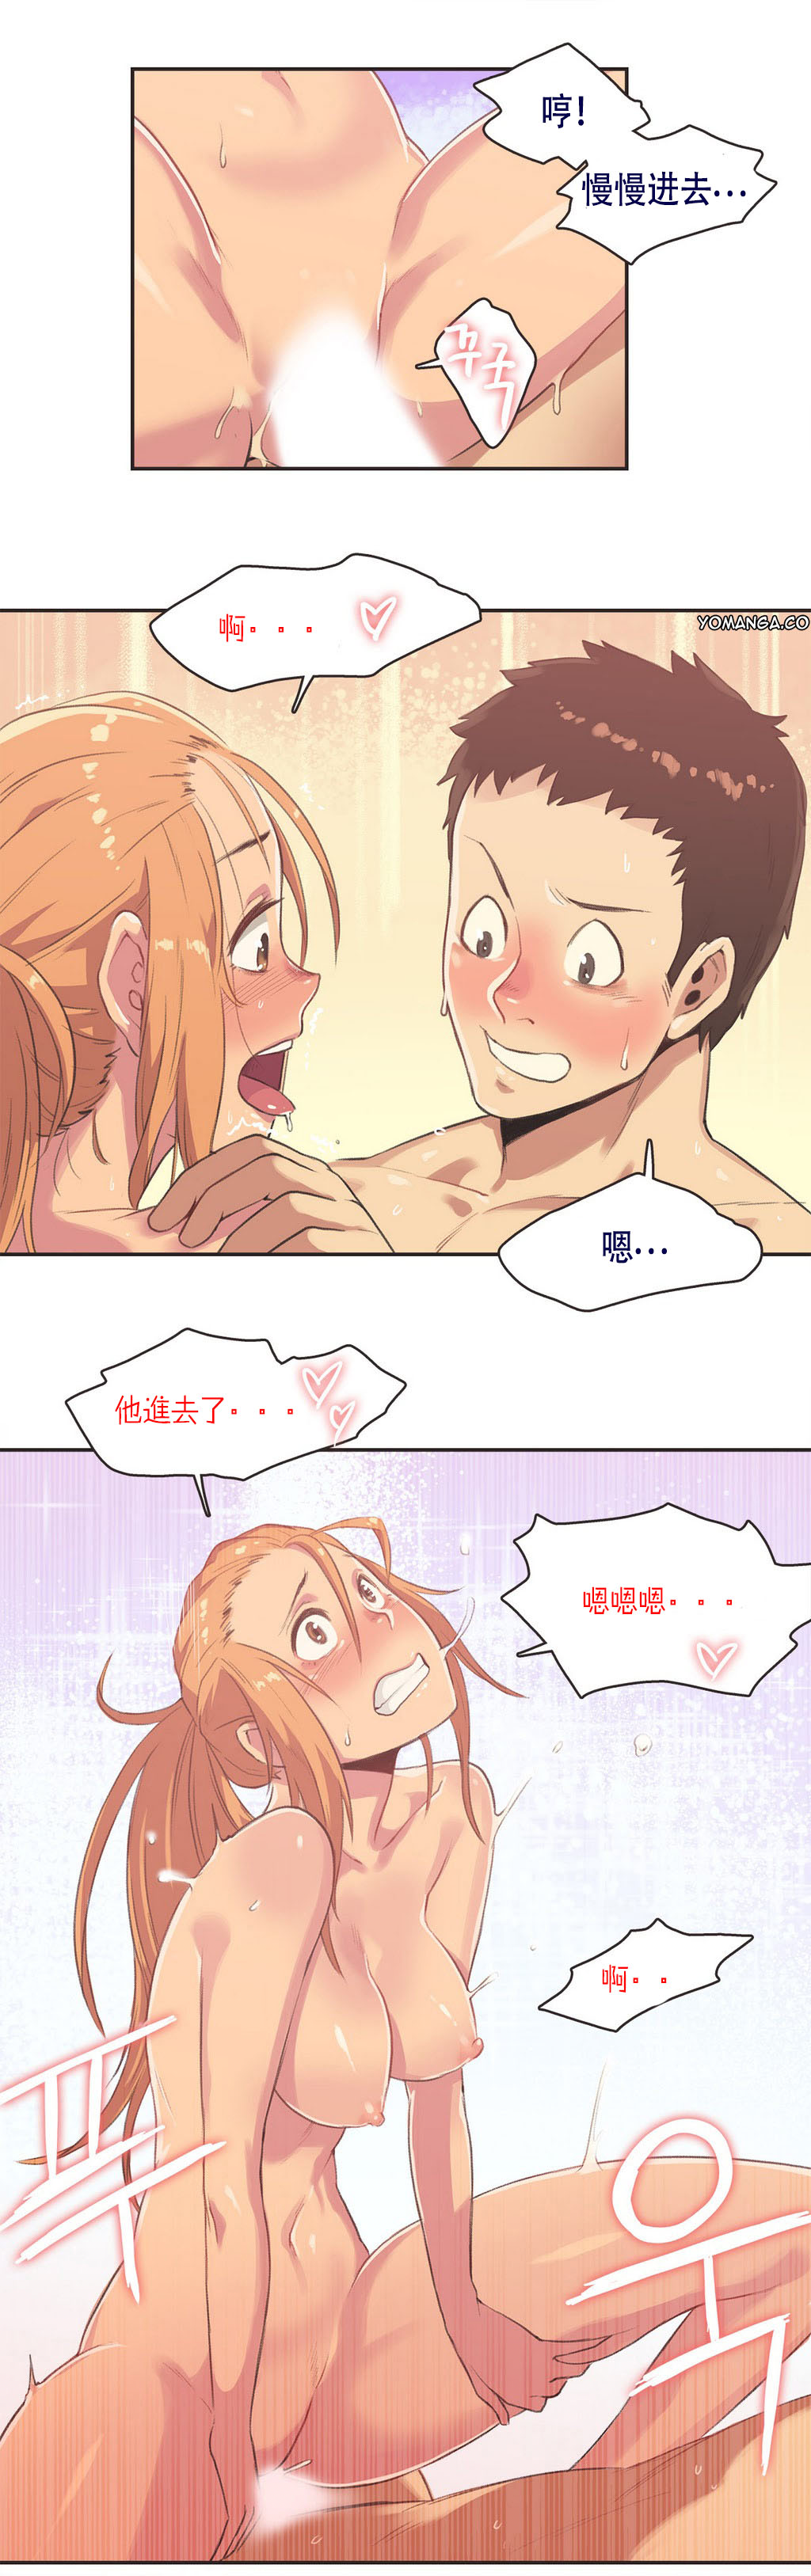 [Gamang] Sports Girl Ch.3 [Chinese] [高麗個人漢化] 